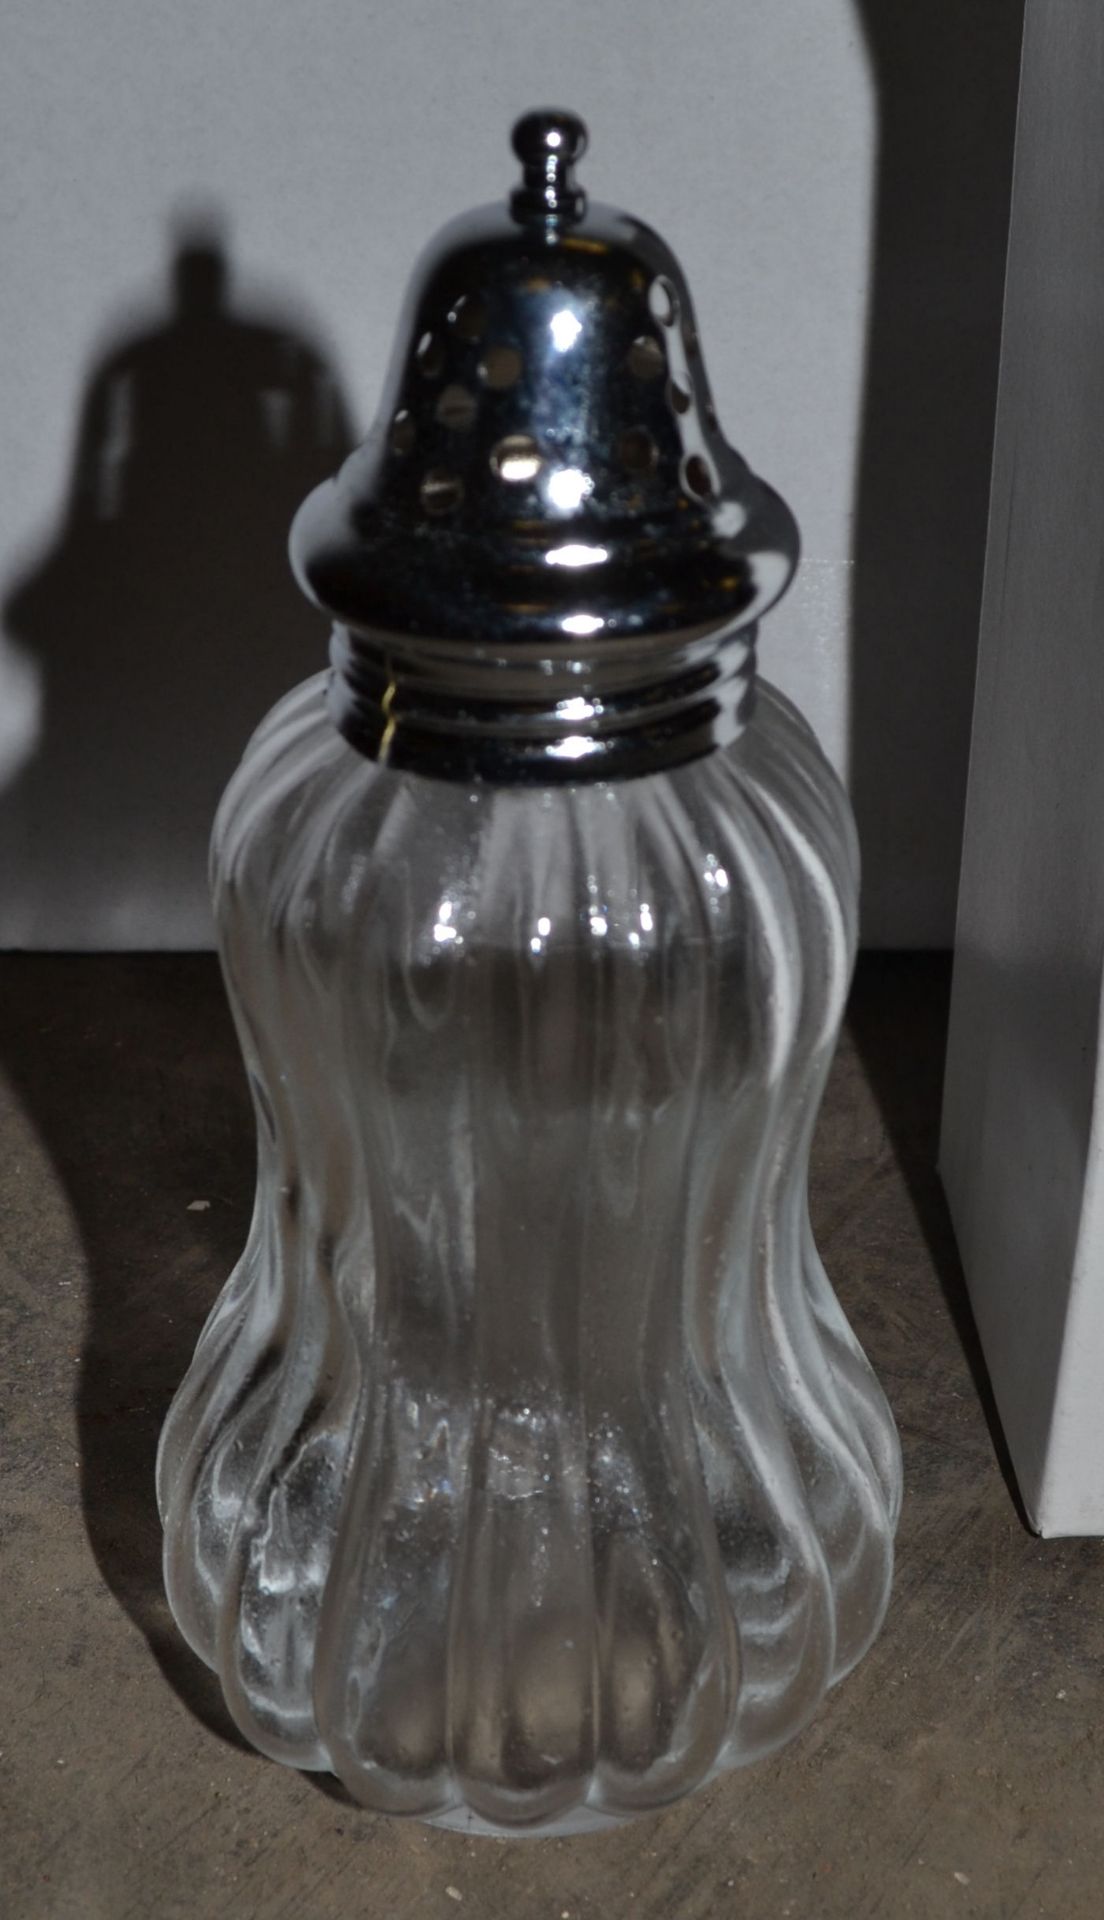 24 x Glass Sugar Shaker with Silver Coloured Top - Ref: FJC014 - CL124 - Location: Bolton - Image 3 of 4